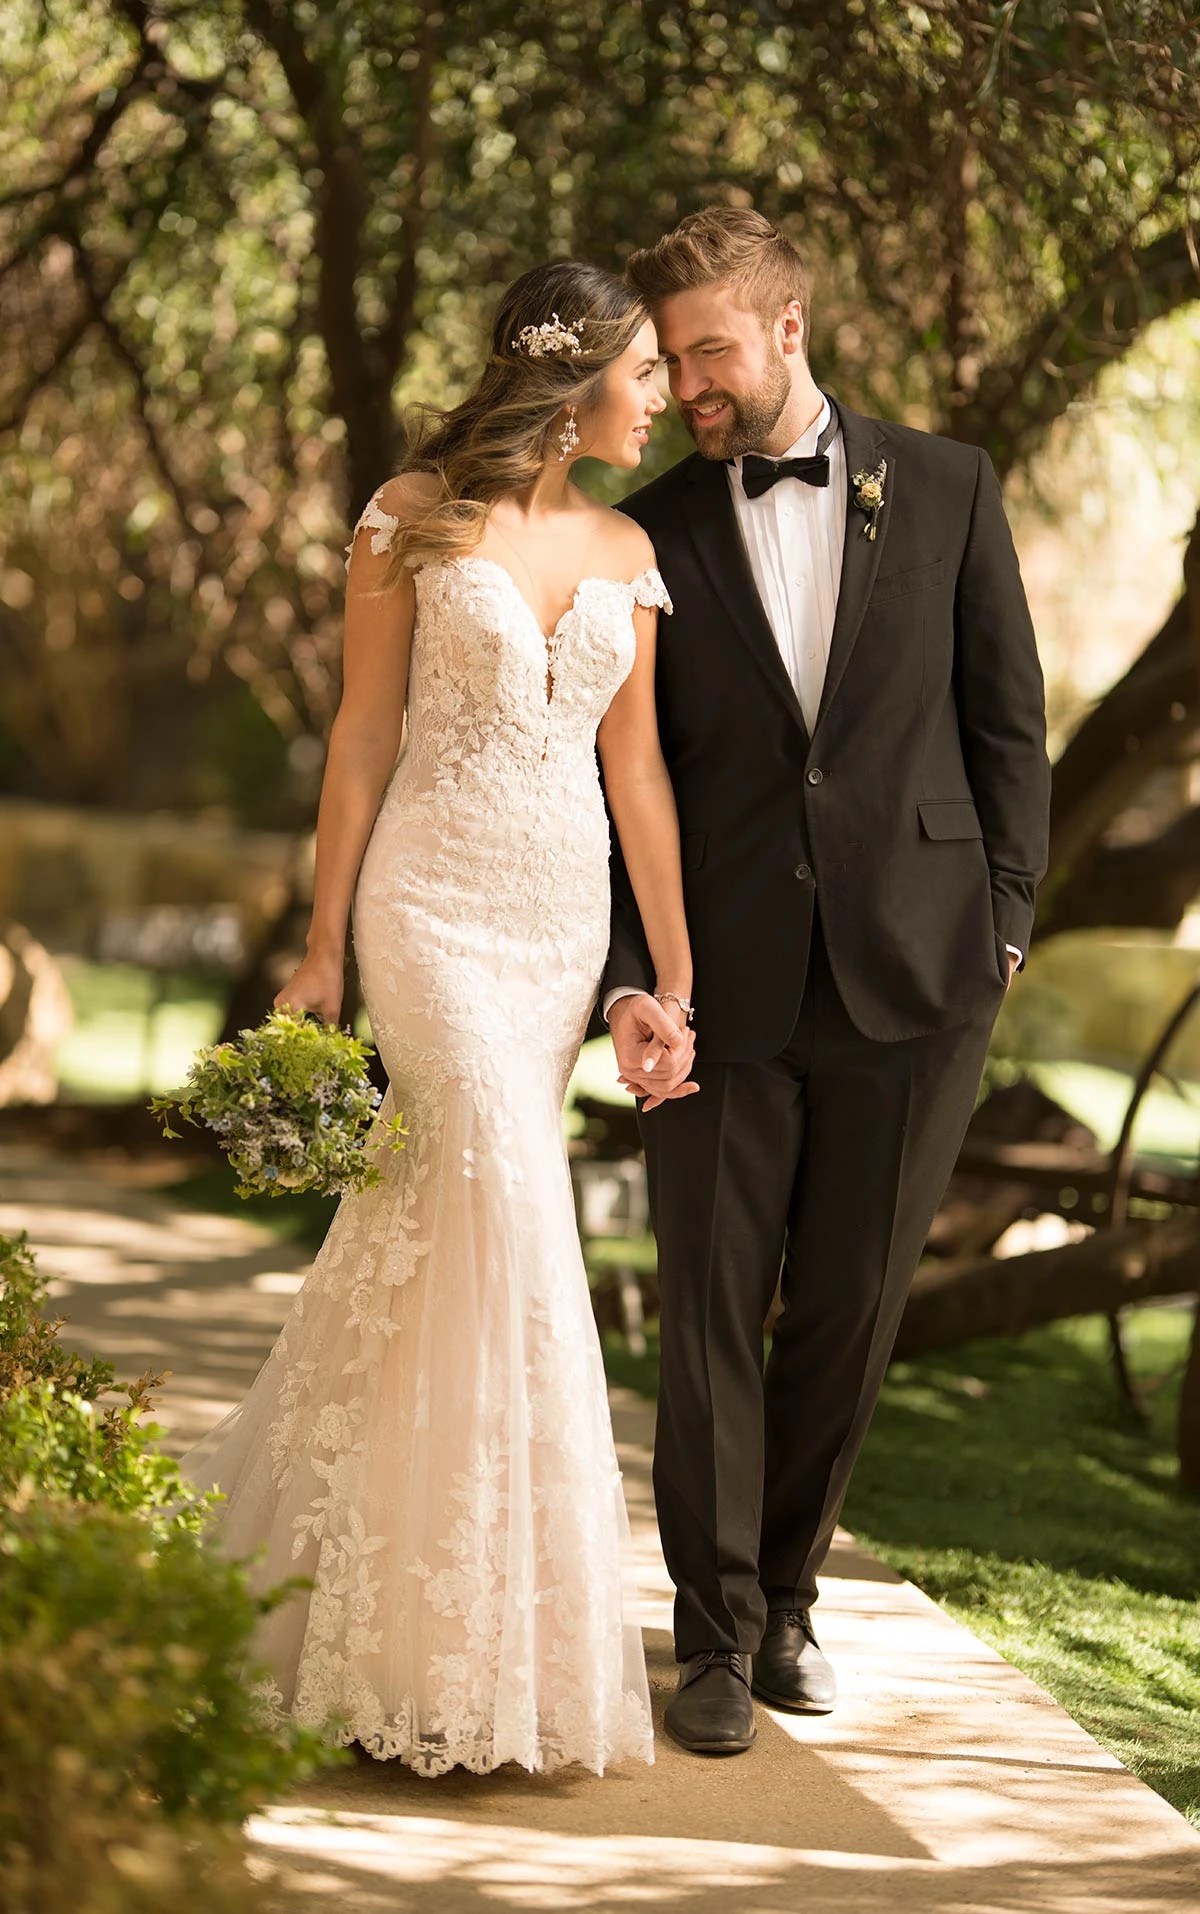 fit and flare open back wedding dress